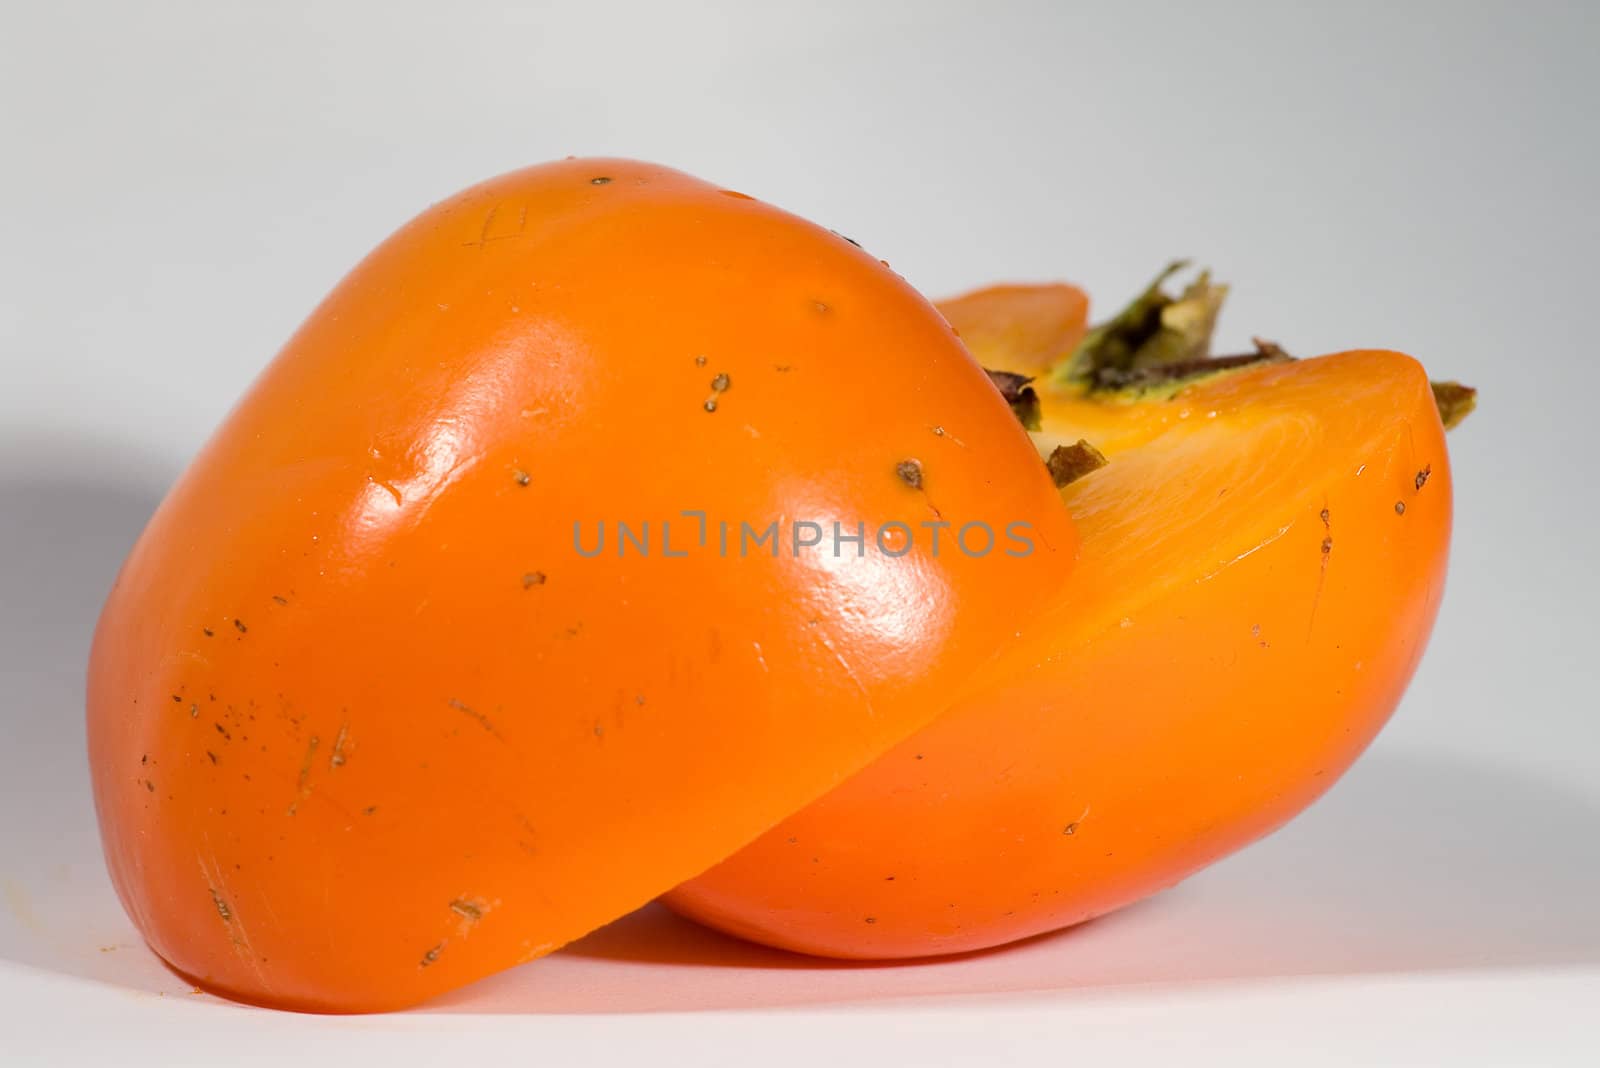 Persimmon by dolnikow